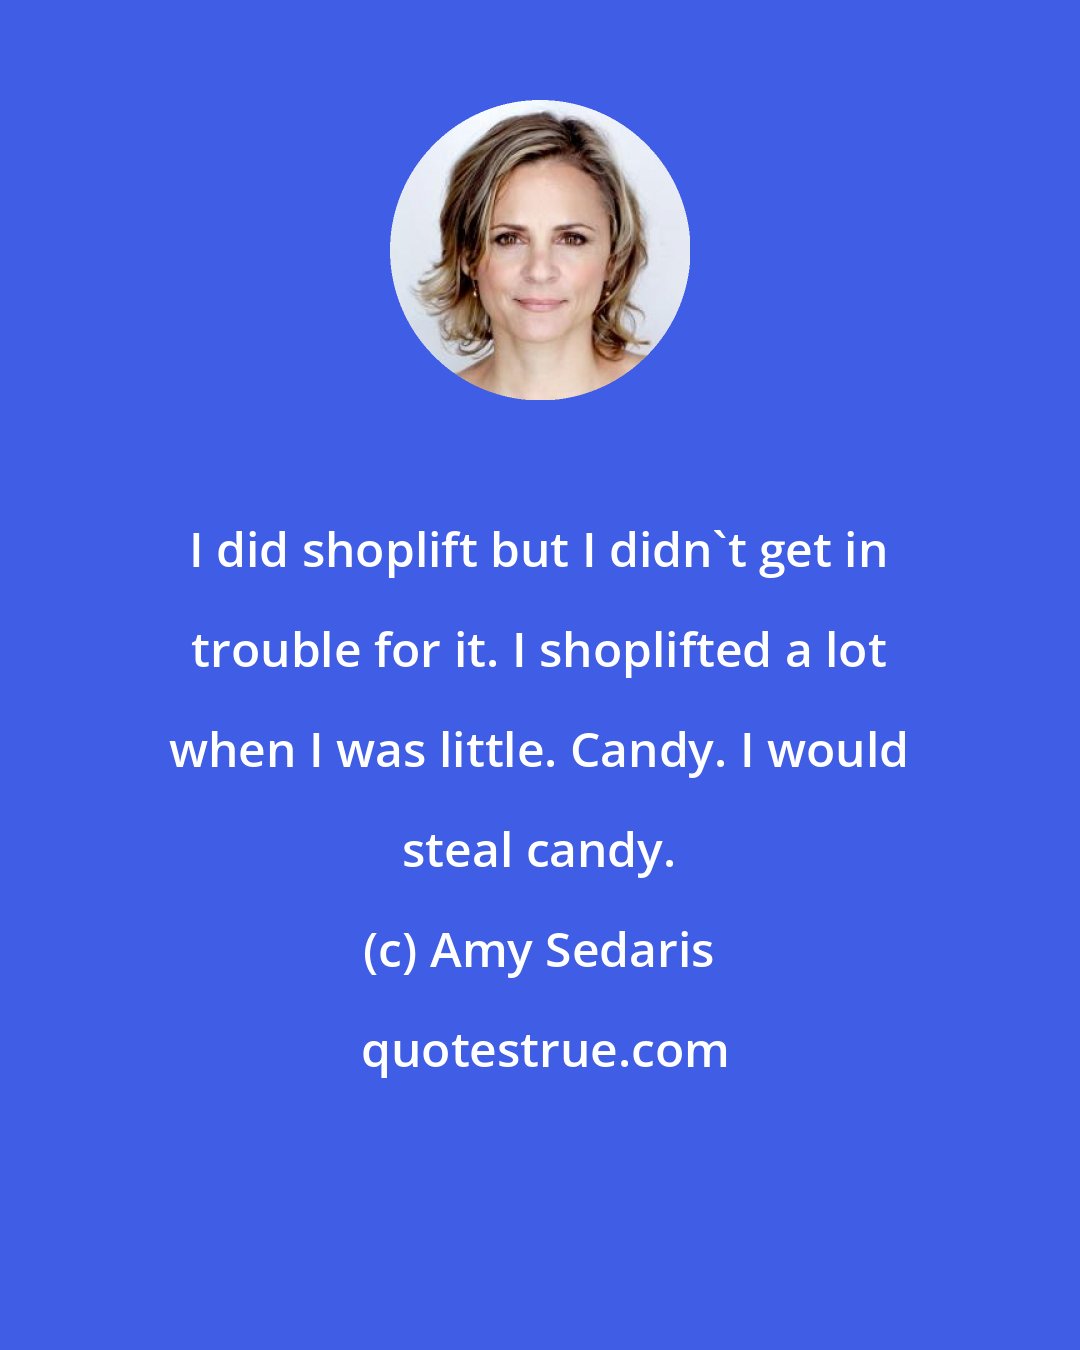 Amy Sedaris: I did shoplift but I didn't get in trouble for it. I shoplifted a lot when I was little. Candy. I would steal candy.